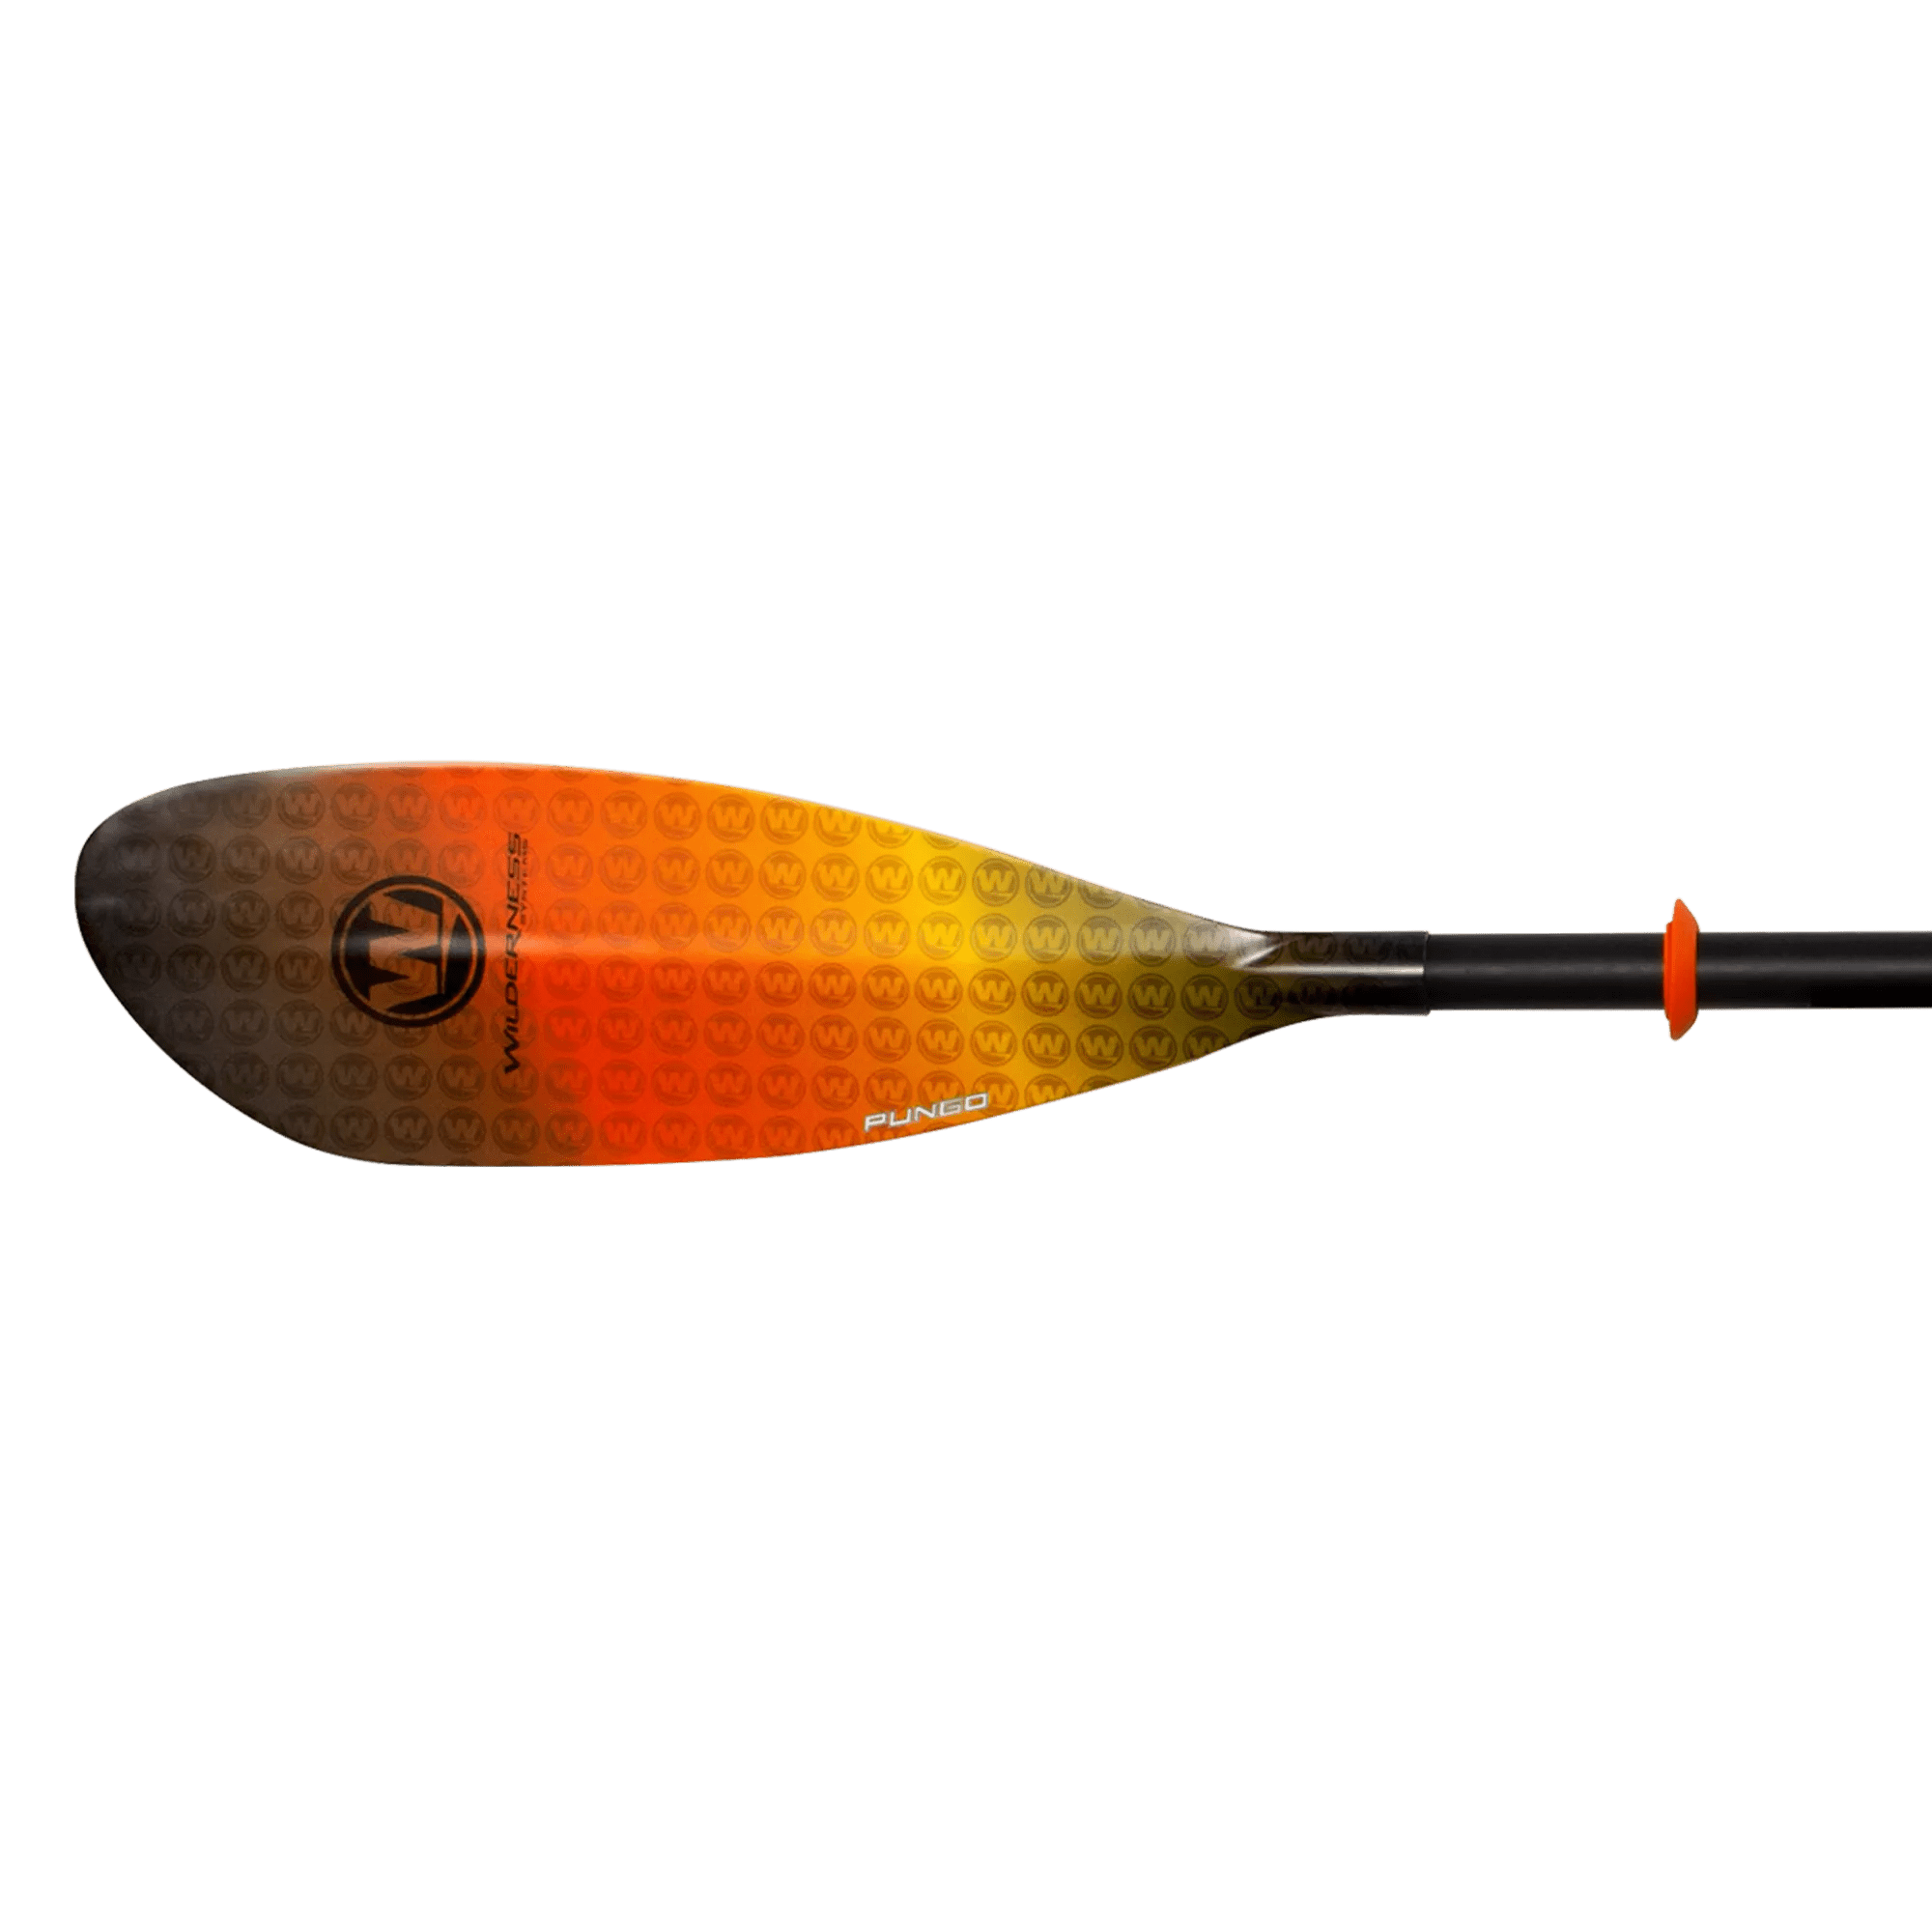 WILDERNESS SYSTEMS - Pungo Glass Kayak Paddle 220-240 cm - Yellow - 8070237 - TOP